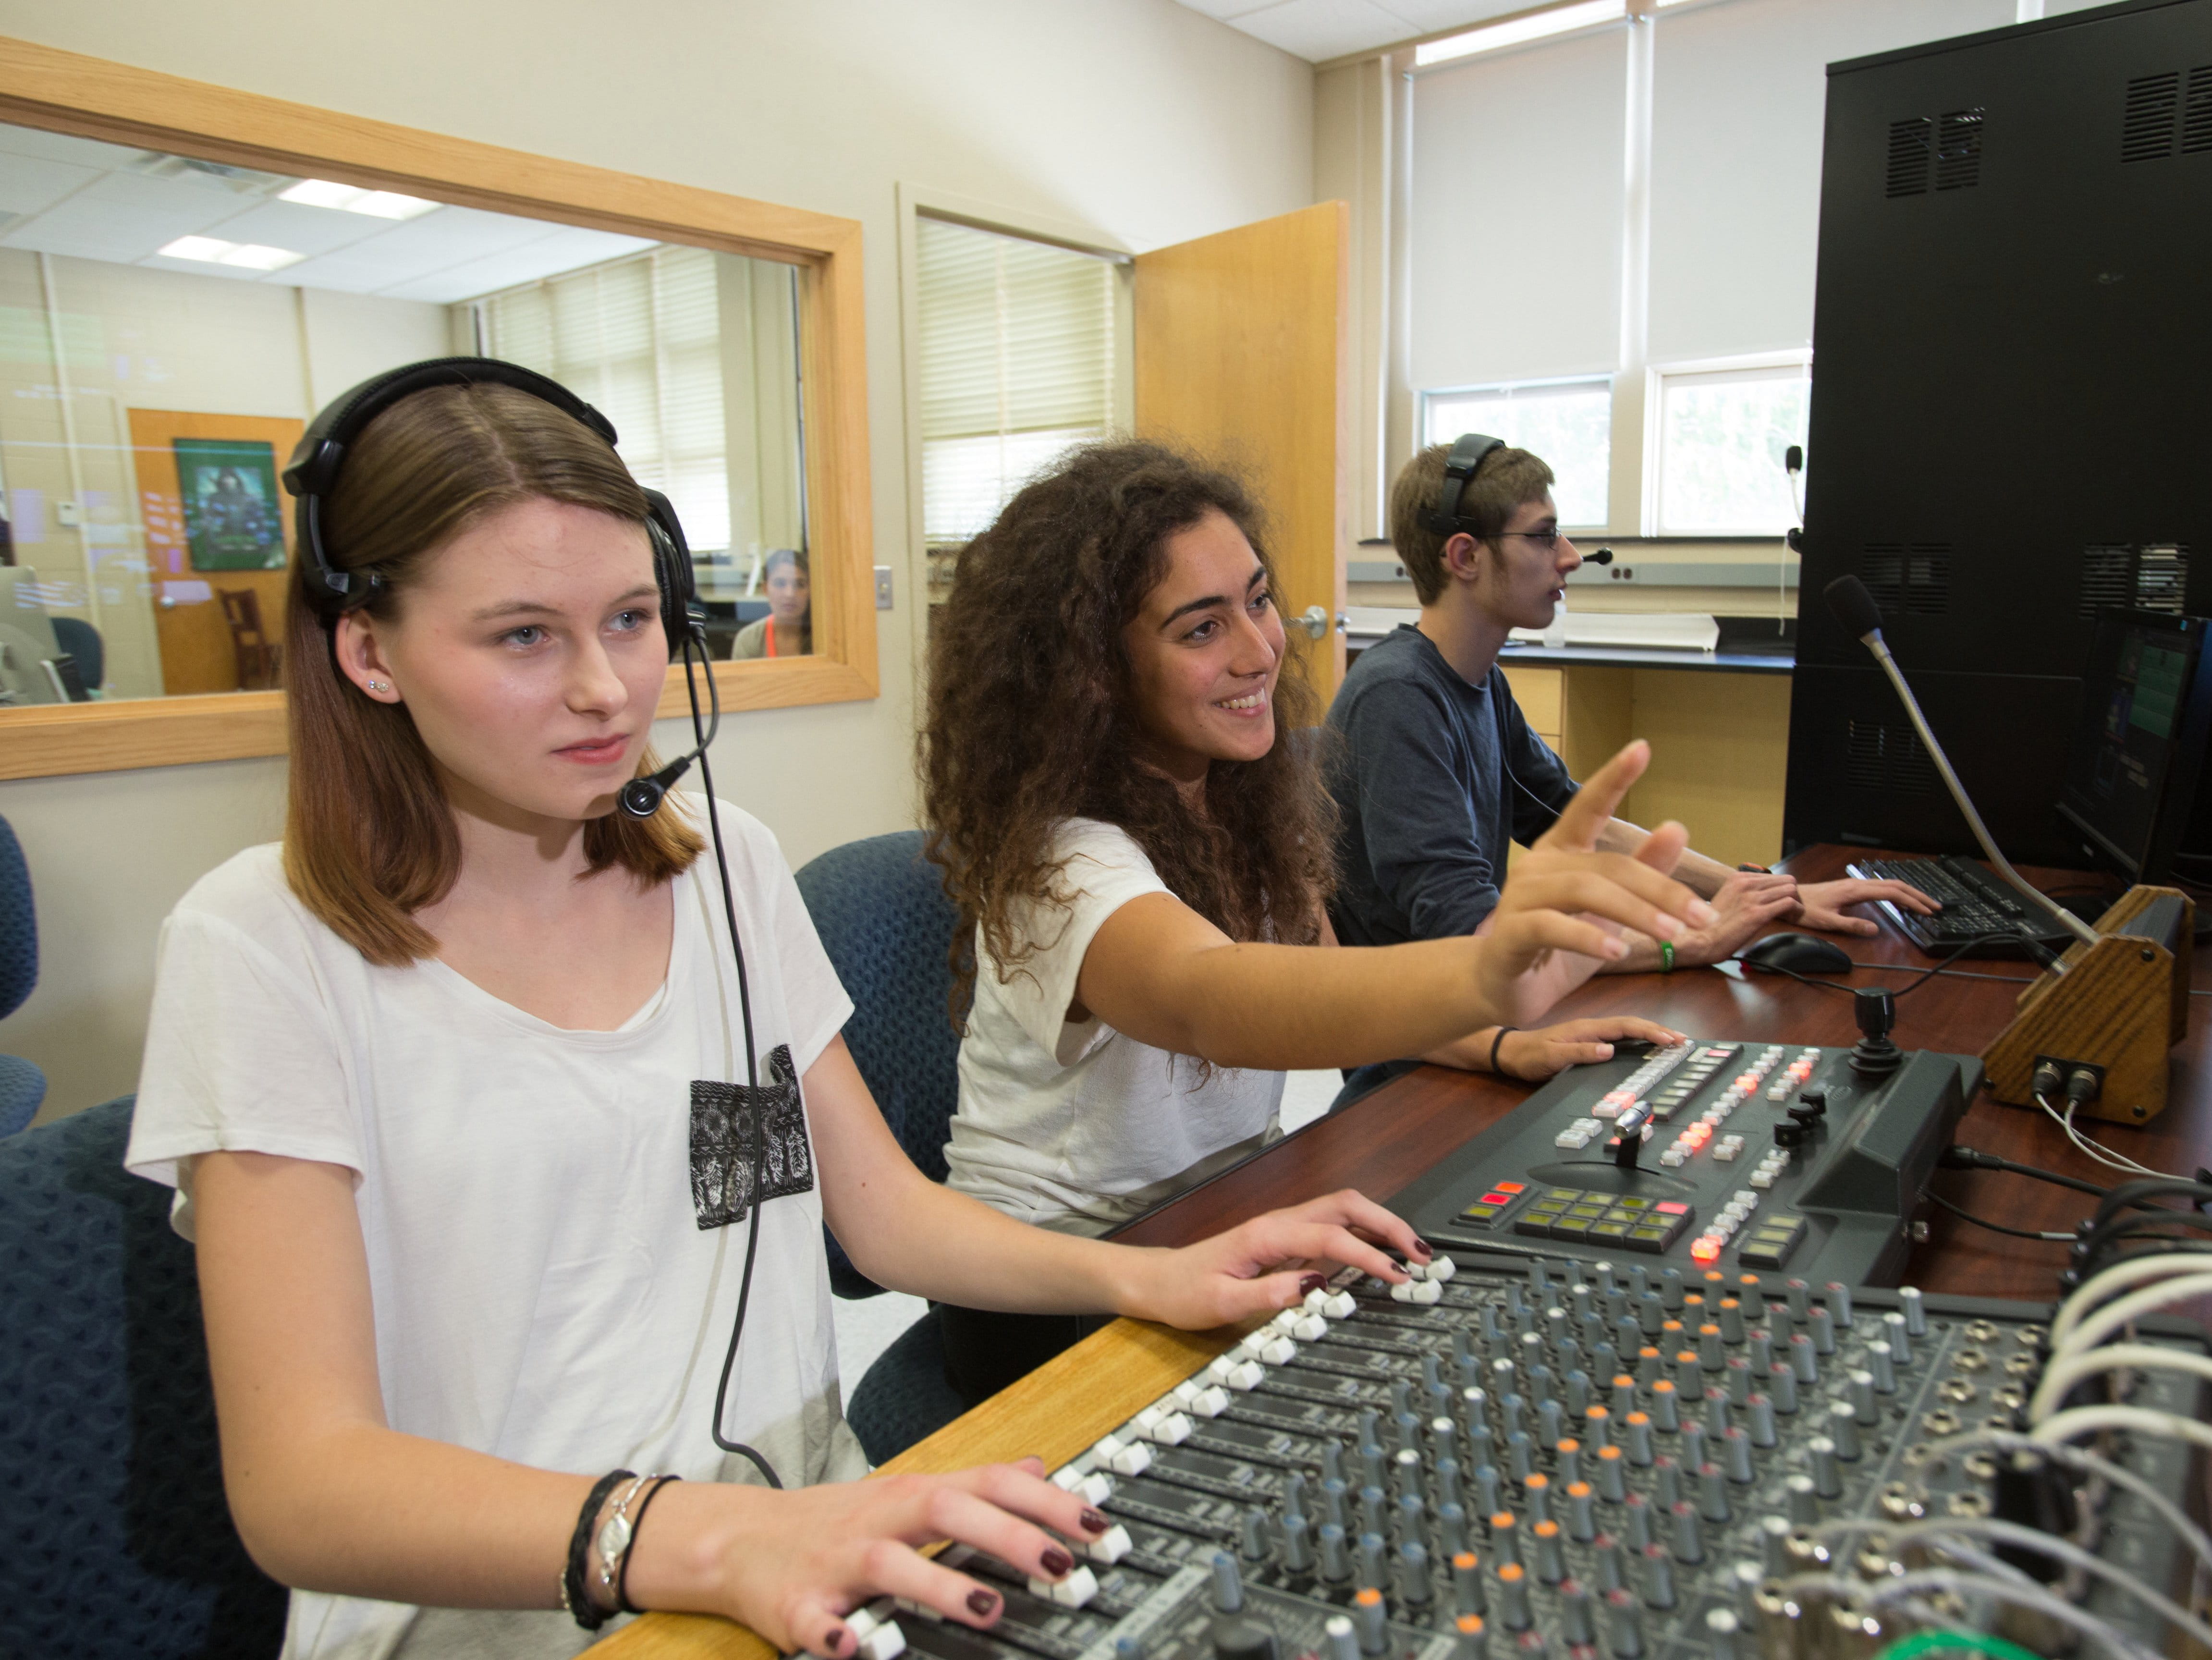 students working in sound booth with headphones